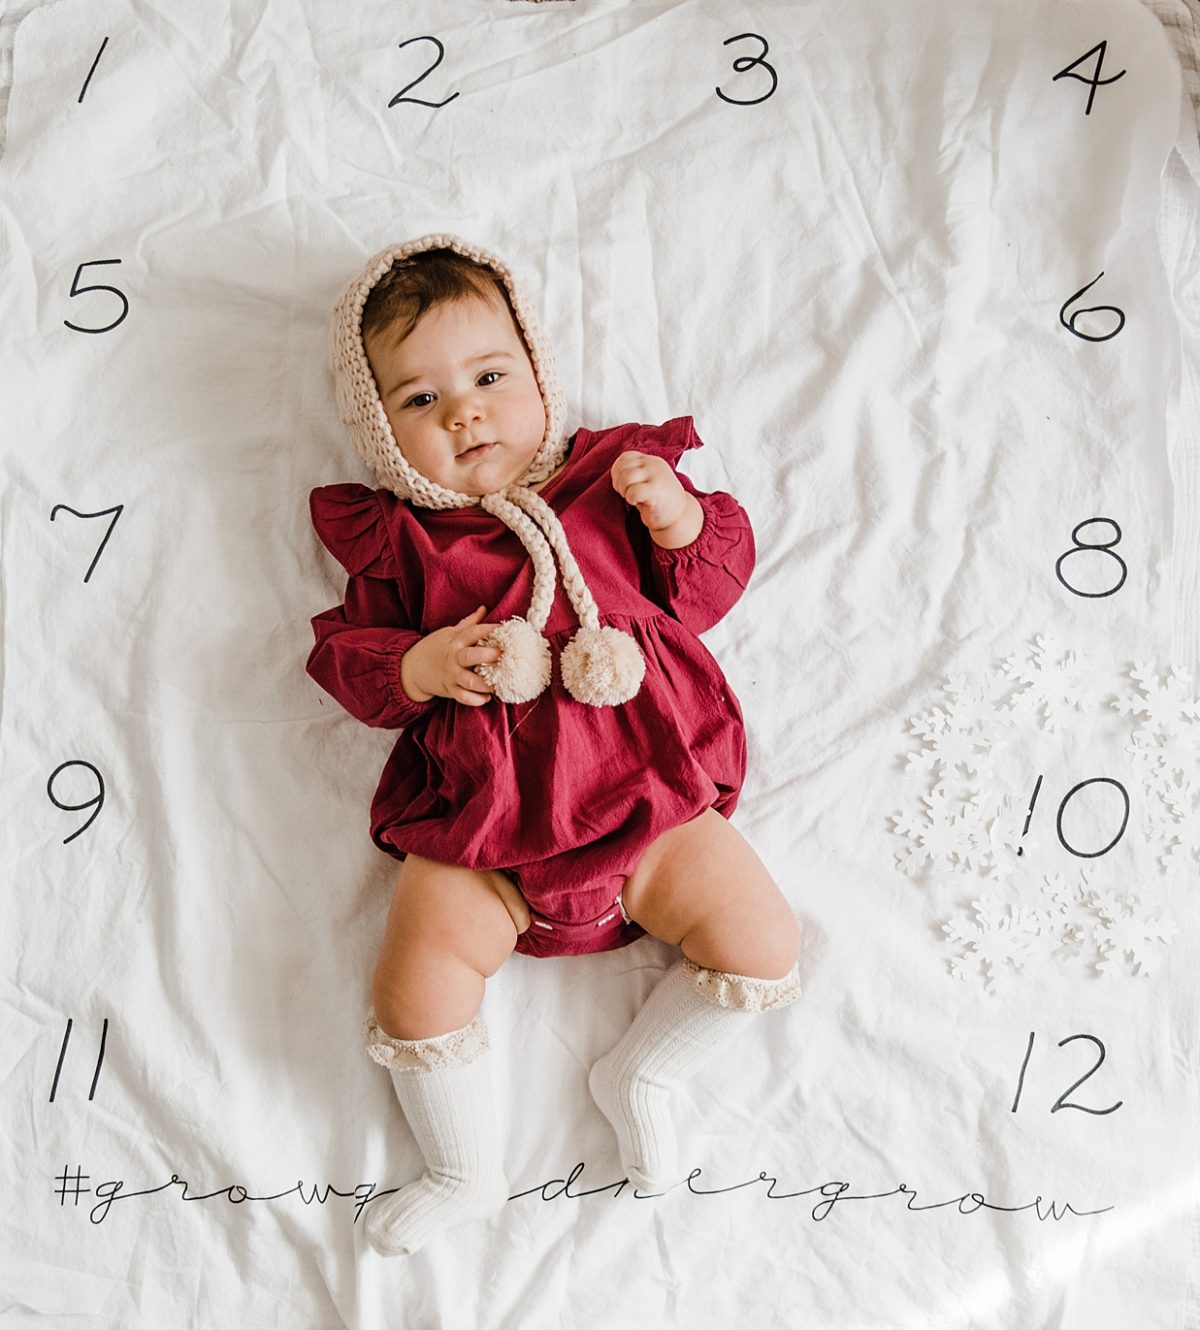 10 Months Young – Hatsy June